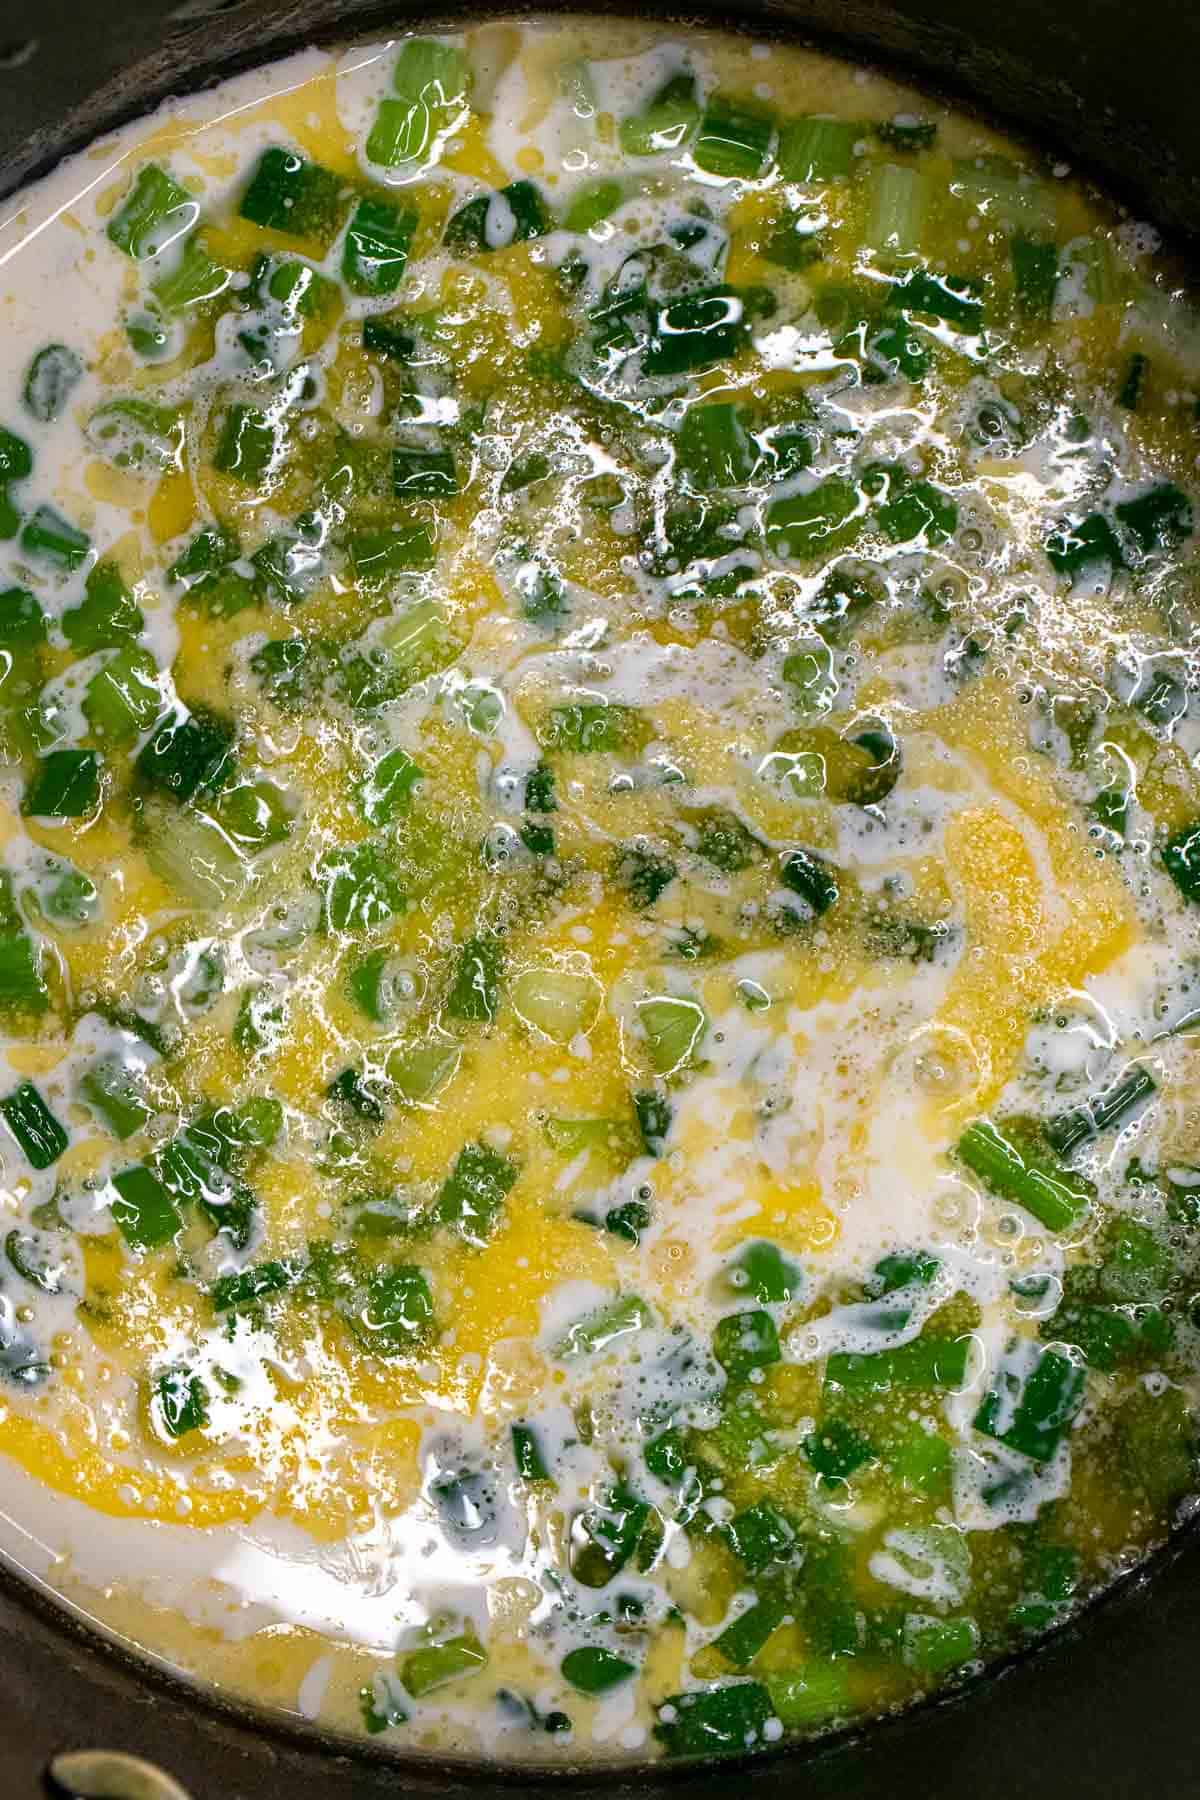 Whole milk added to melted butter and scallions to infuse the milk with their flavor.